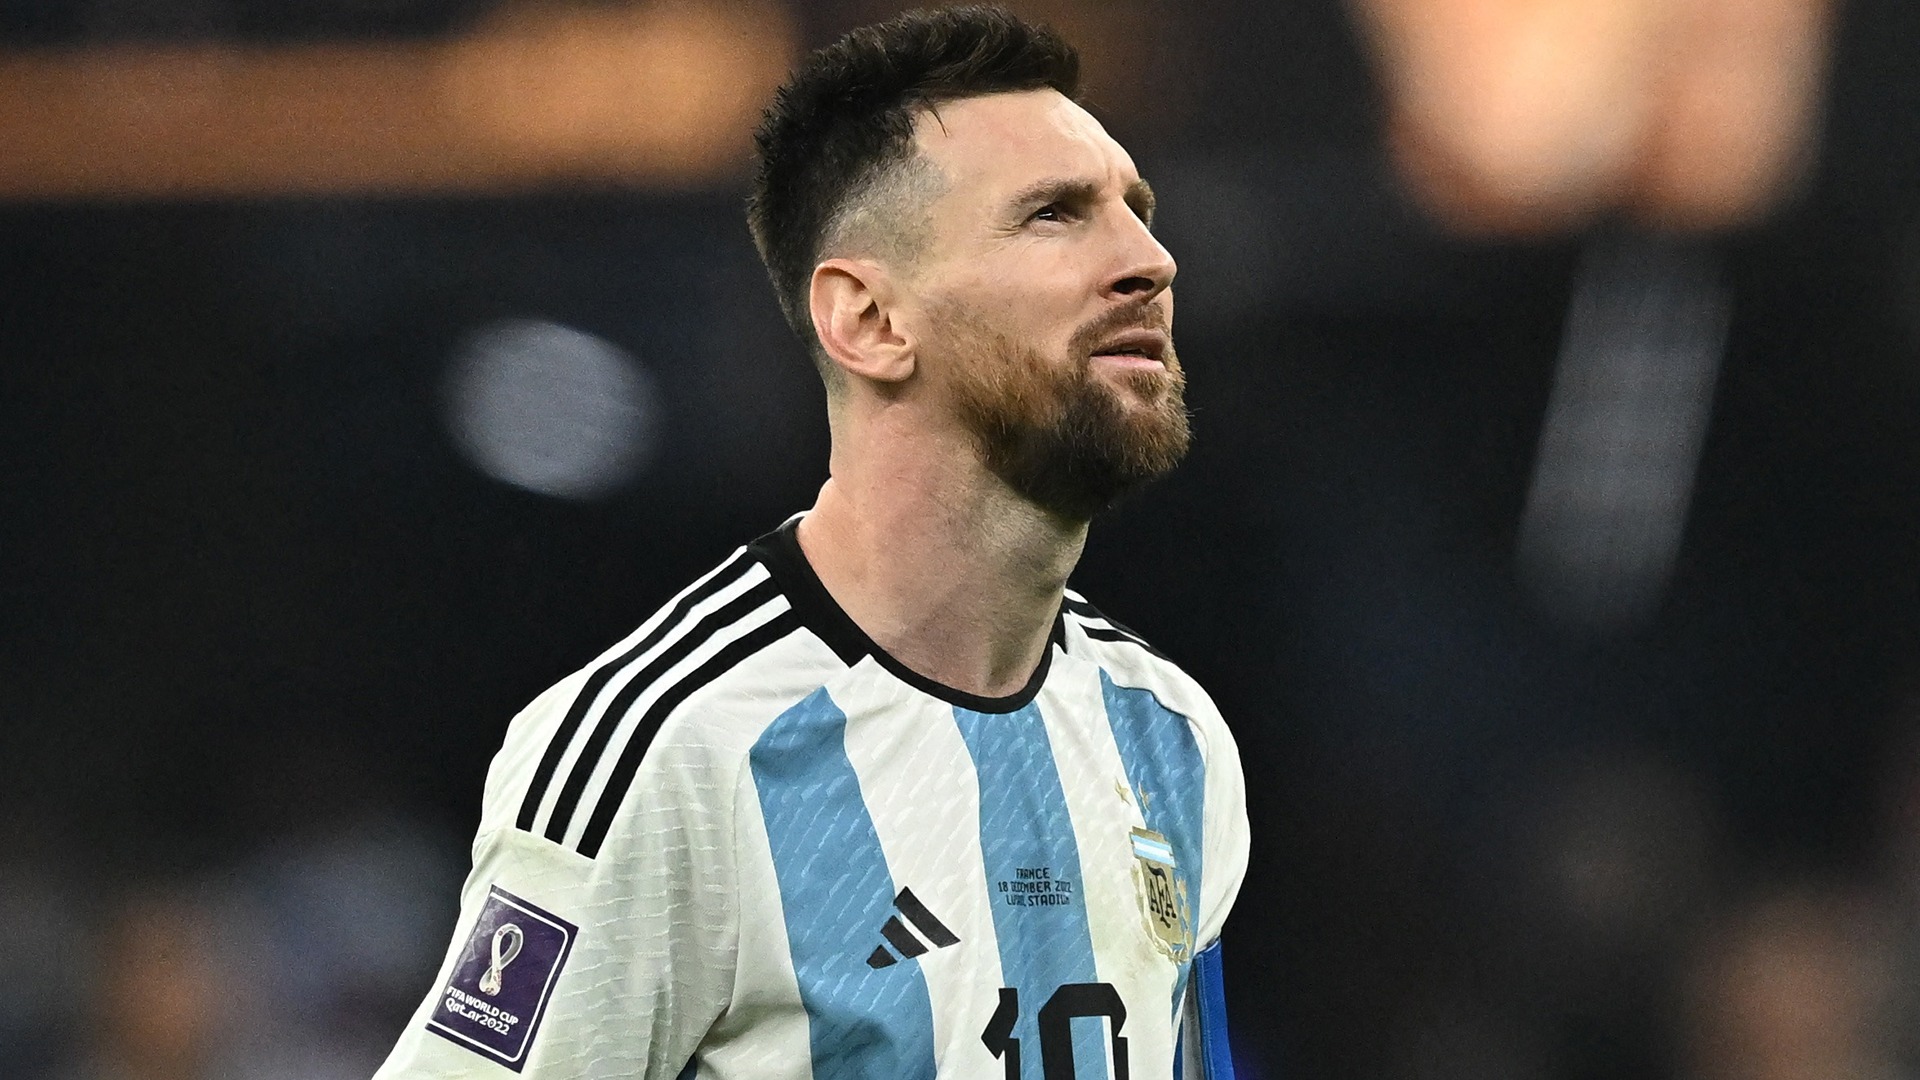 world cup argentina messi jersey